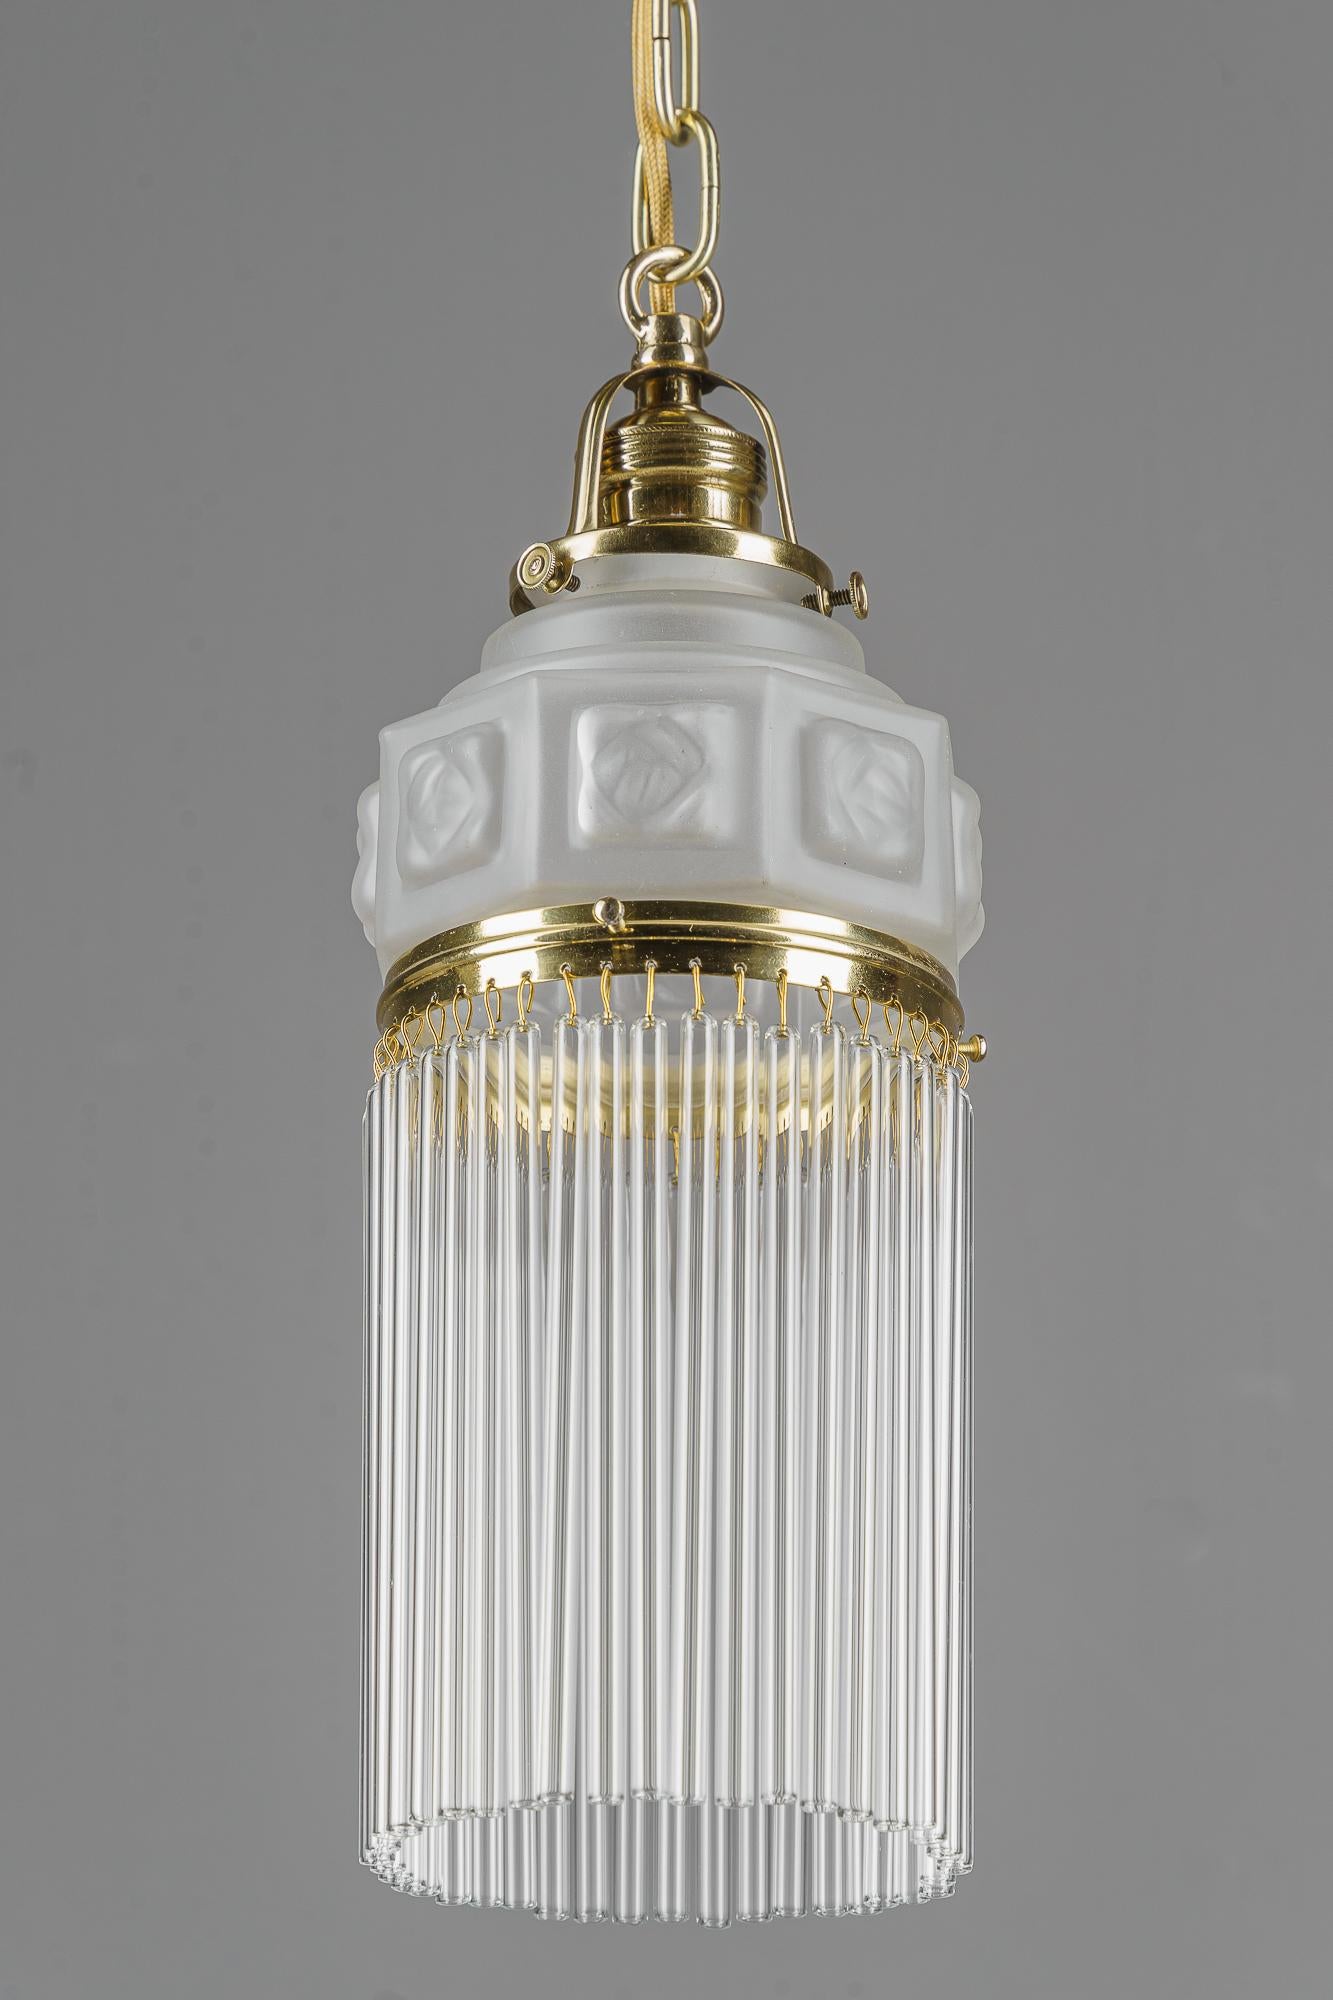 Art Deco pendant around 1920s with frosted glass shade vienna 1920s
Original frosted glass shade
The glass sticks are replaced ( new )
Brass polished and stove enameled